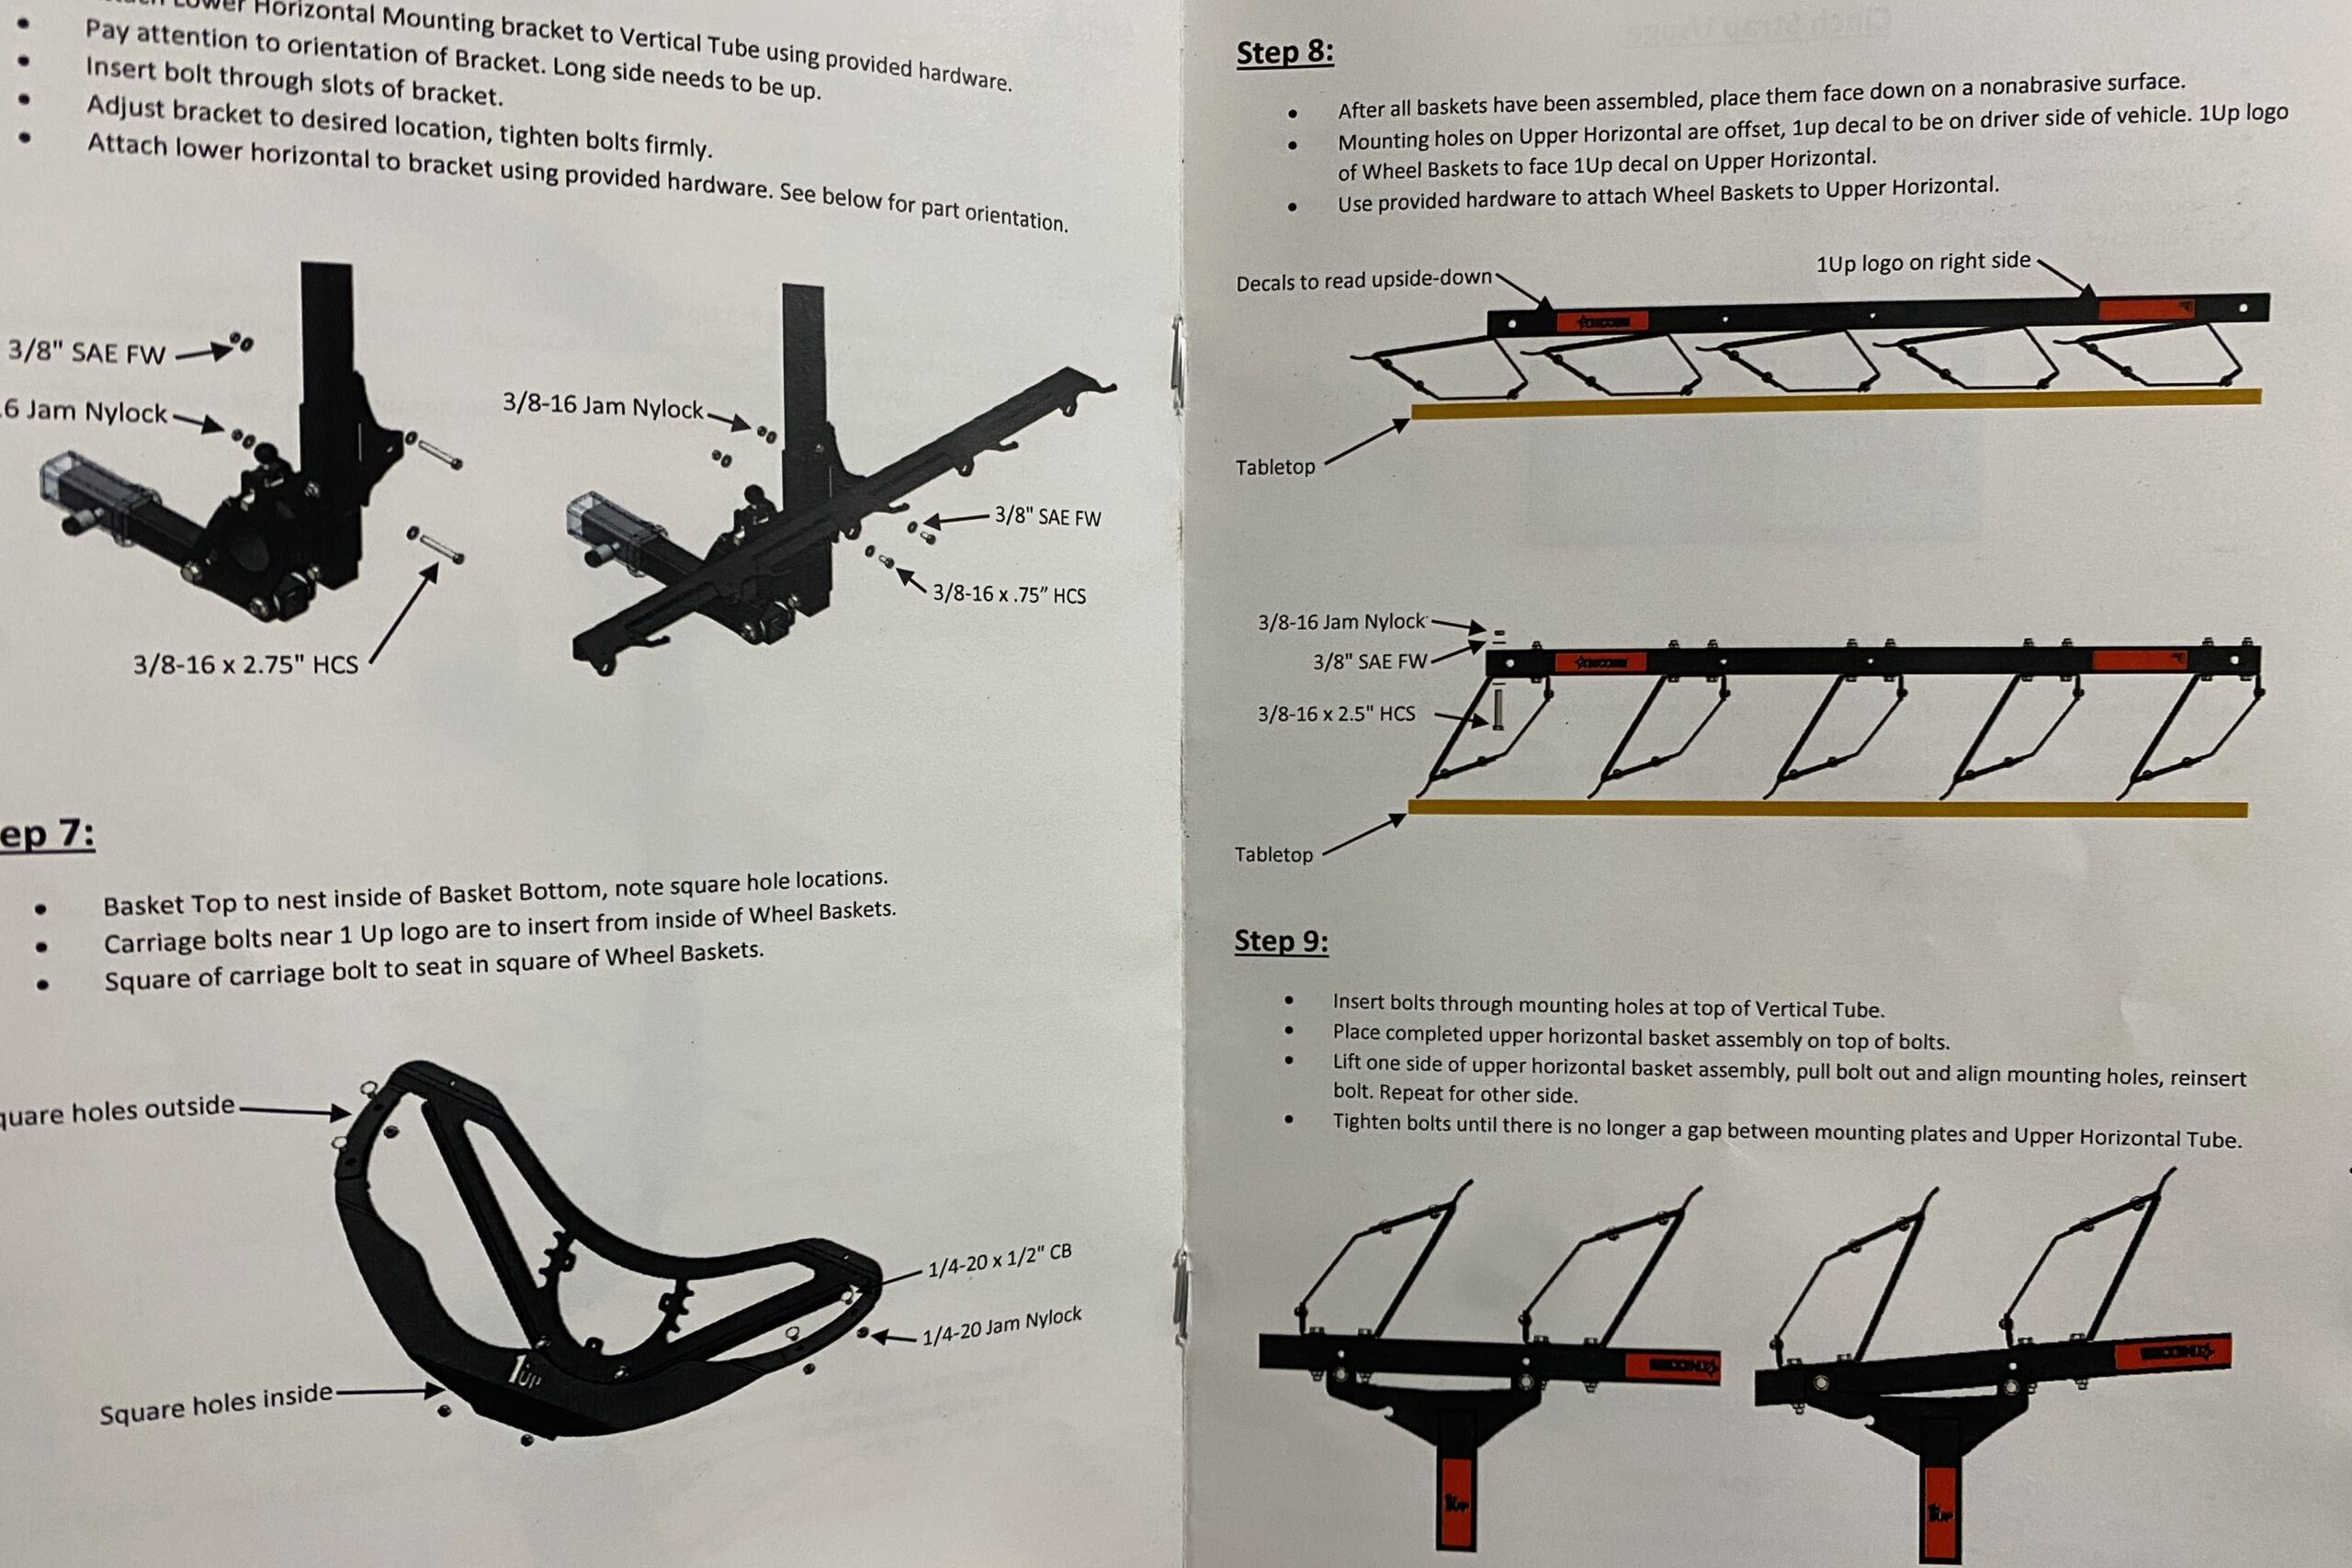 Assembly instructions for the 1Up Recon hitch bike rack